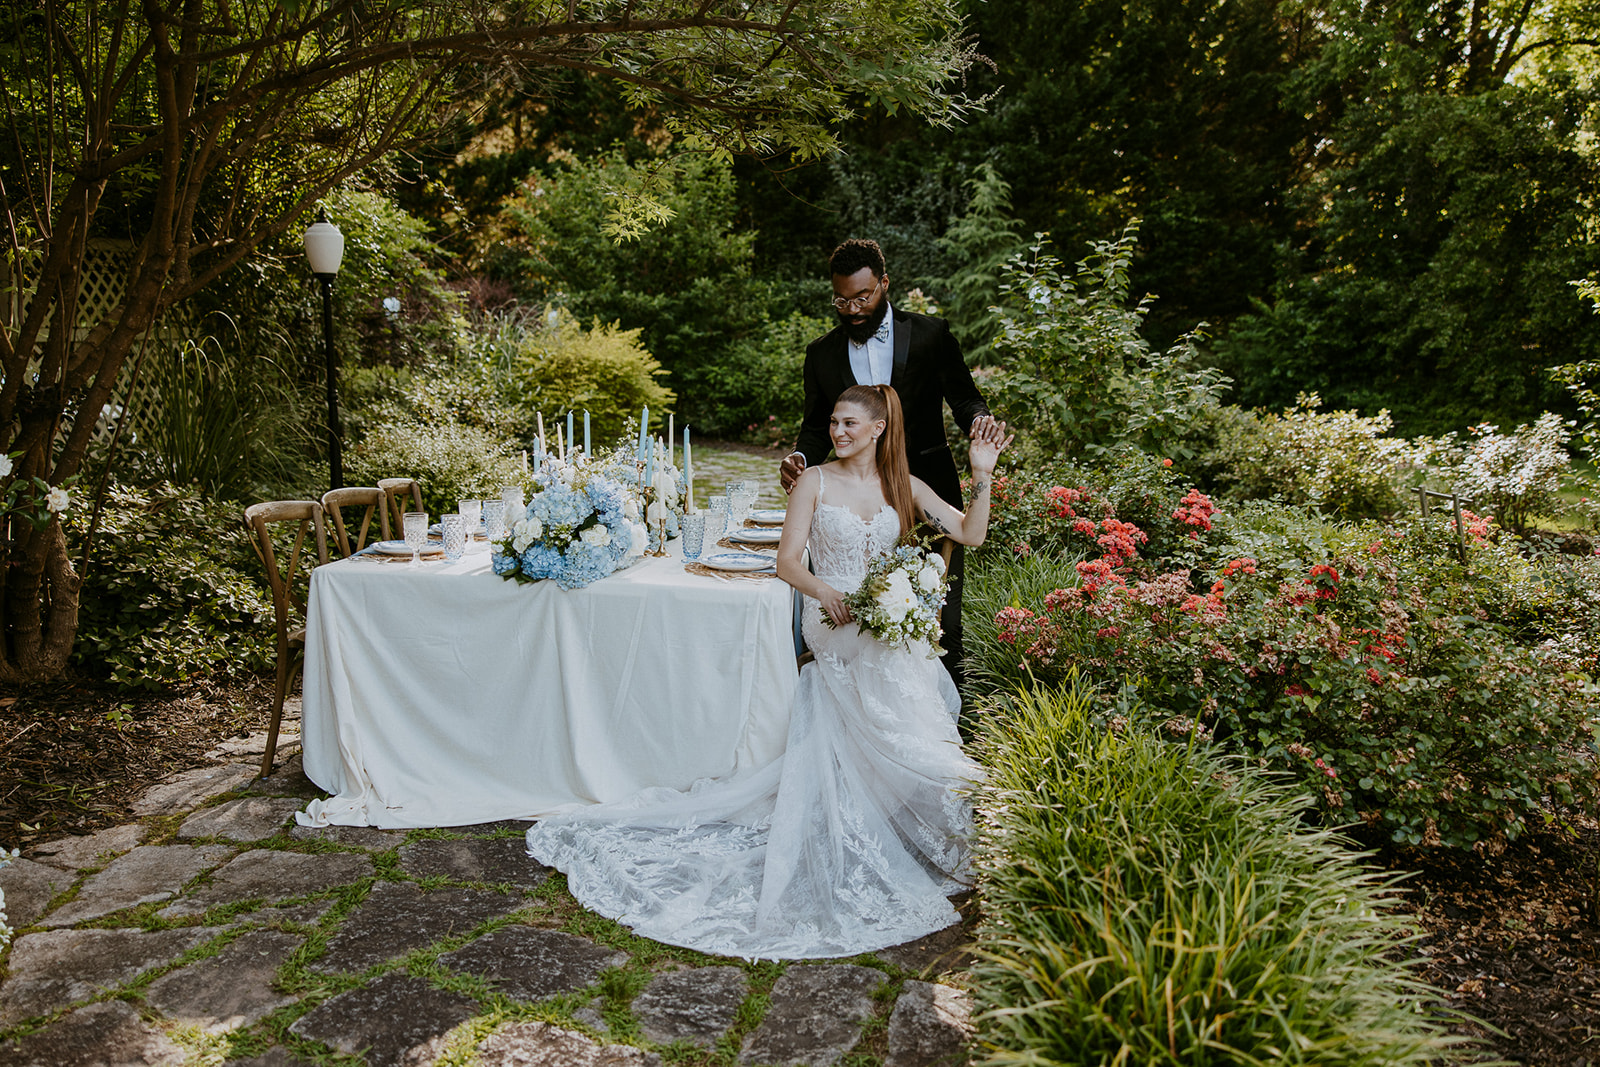 A bride in a white gown sits holding flowers while a groom in a black tuxedo stands behind her, both positioned beside an elegantly set table outdoors with foliage and flowers around. | The best wedding and elopement timeline examples